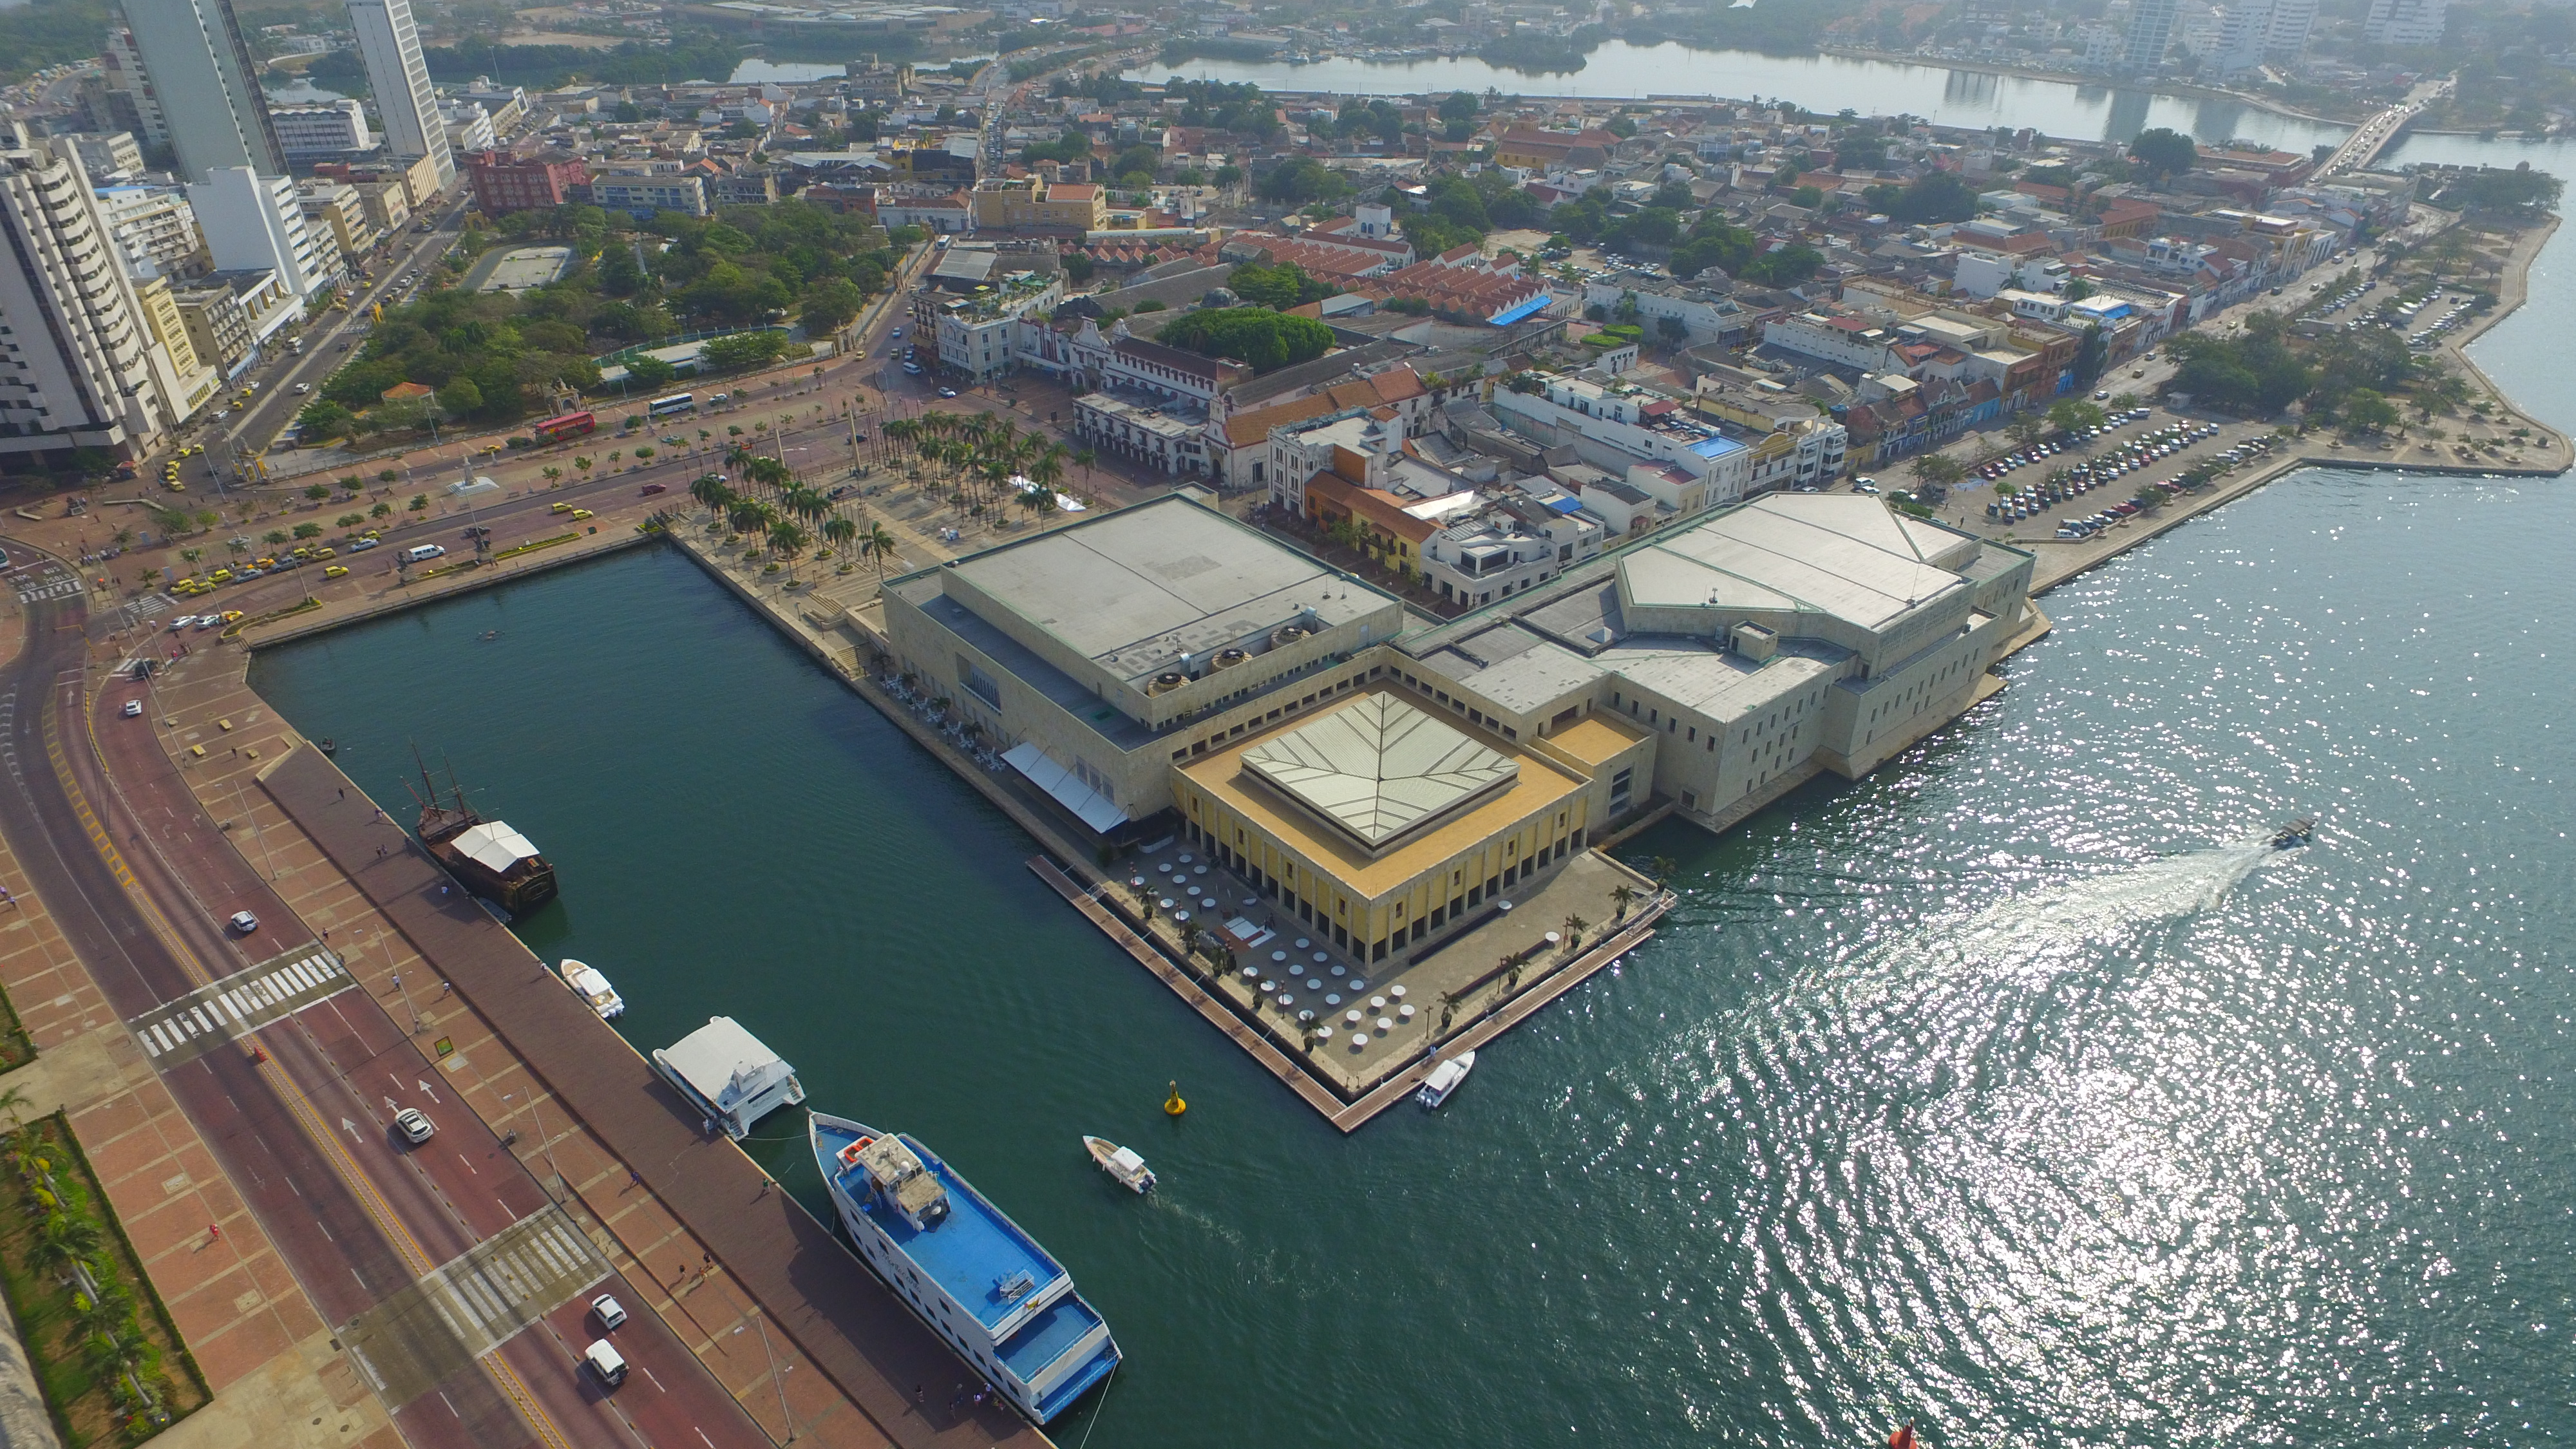 Photo View of the Cartagena de Indias Convention Center and the old port